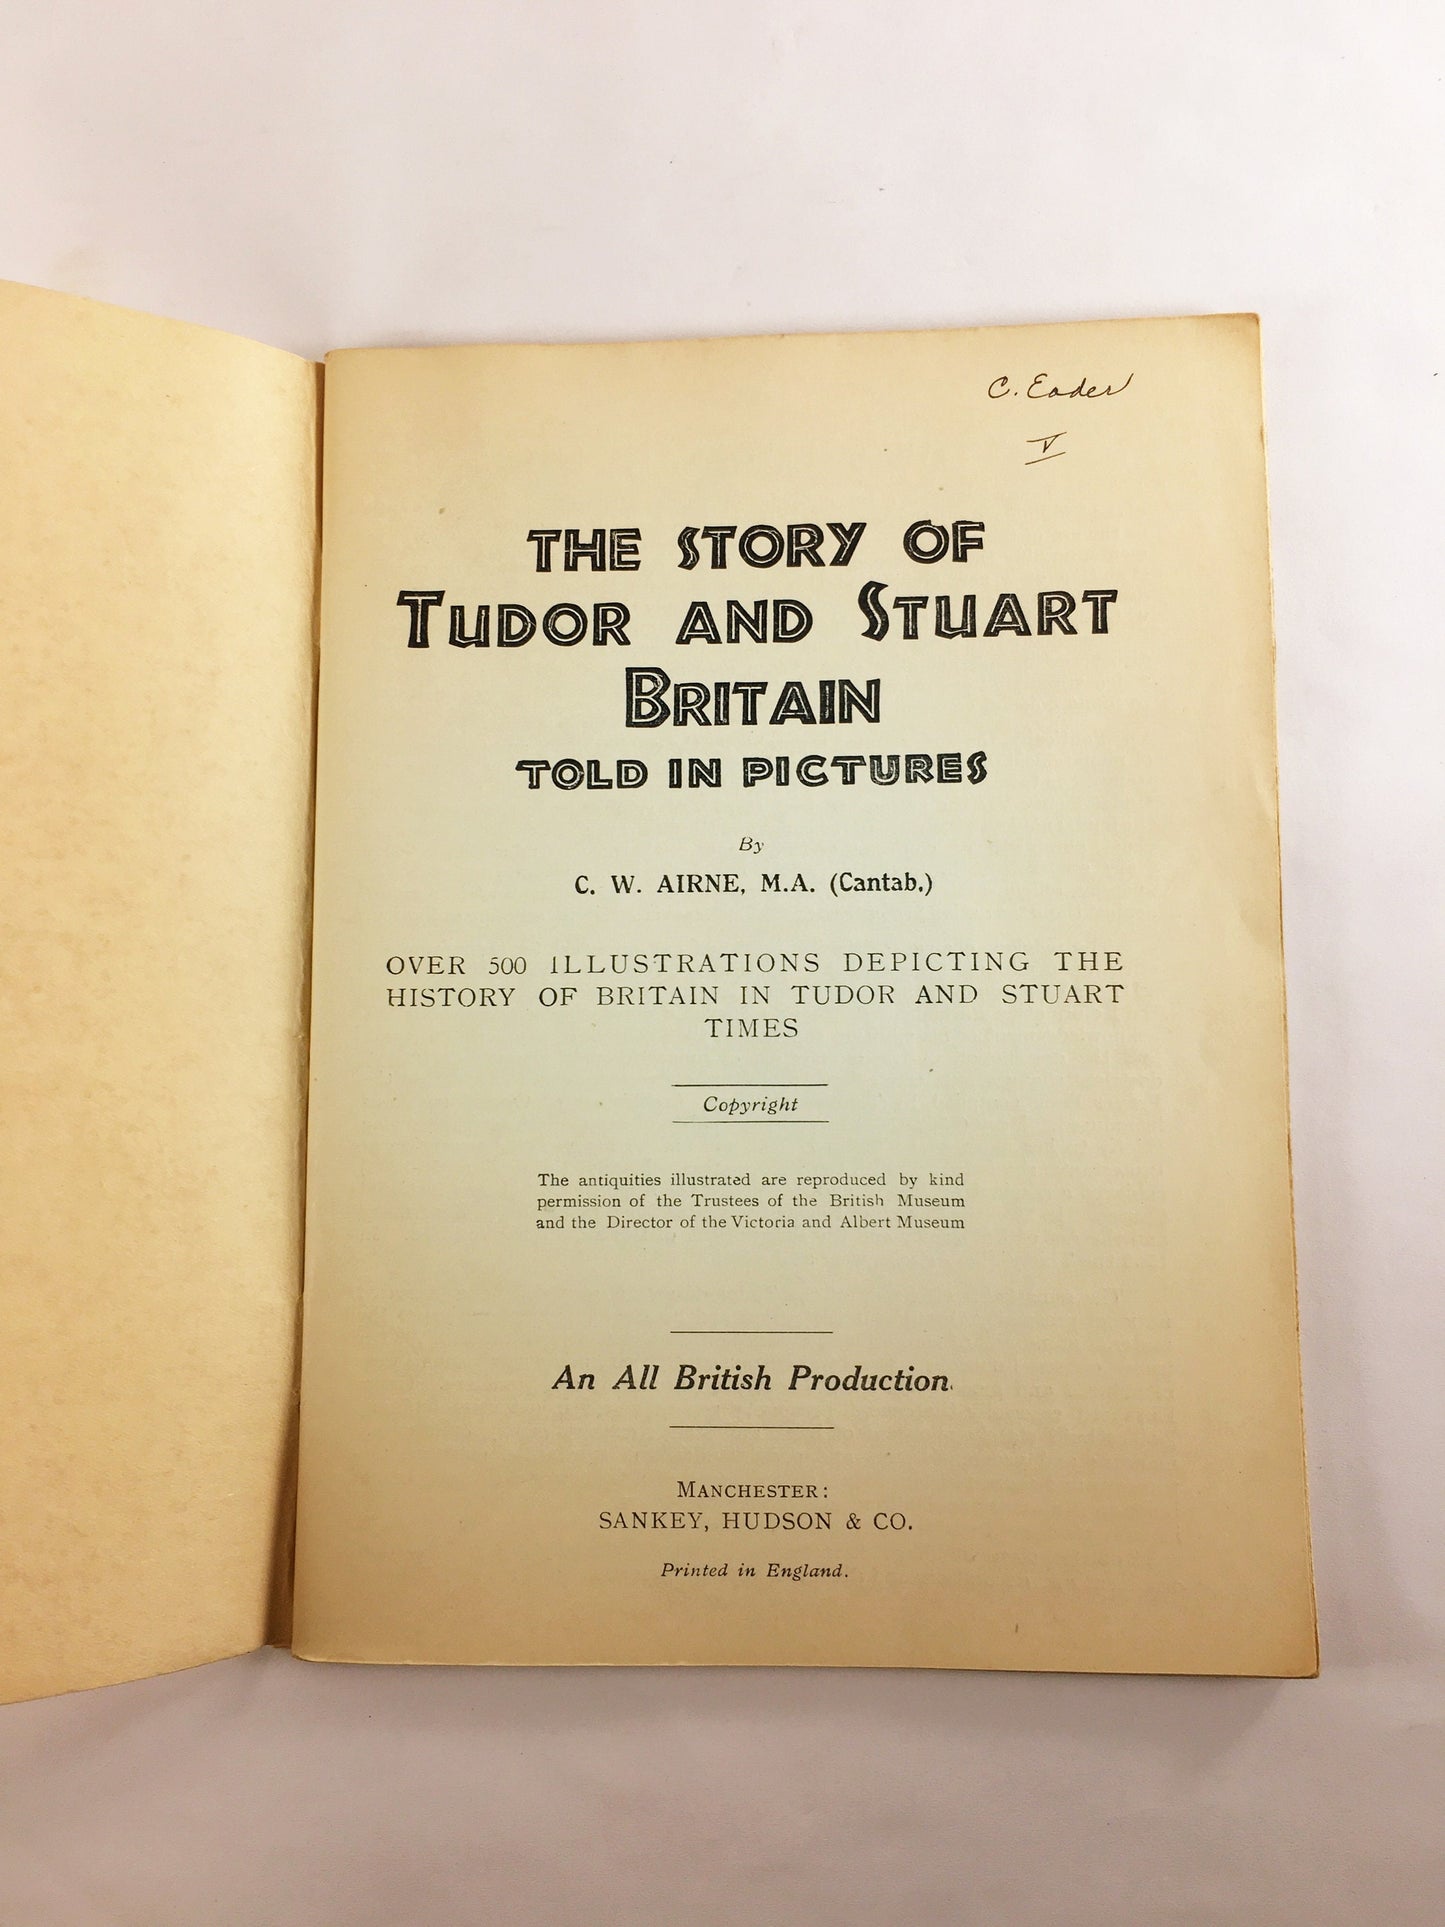 1934 Story of Tudor and Stuart. Britain told in Pictures by CW Airne. 500+ illustrations. Vintage paperback book published in London